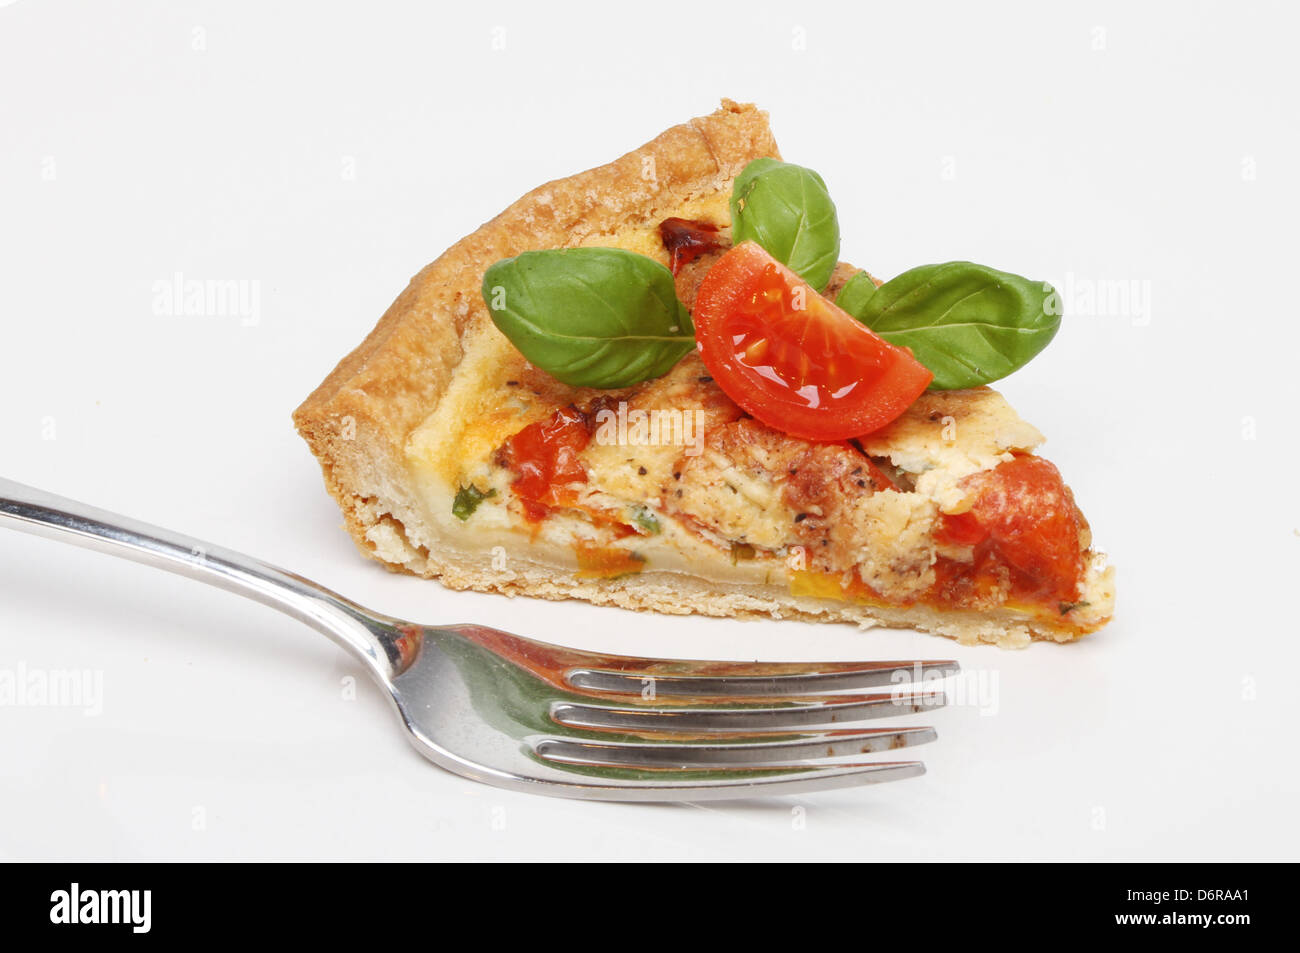 Slice of tomato, cheese and basil quiche on a plate with a fork Stock Photo